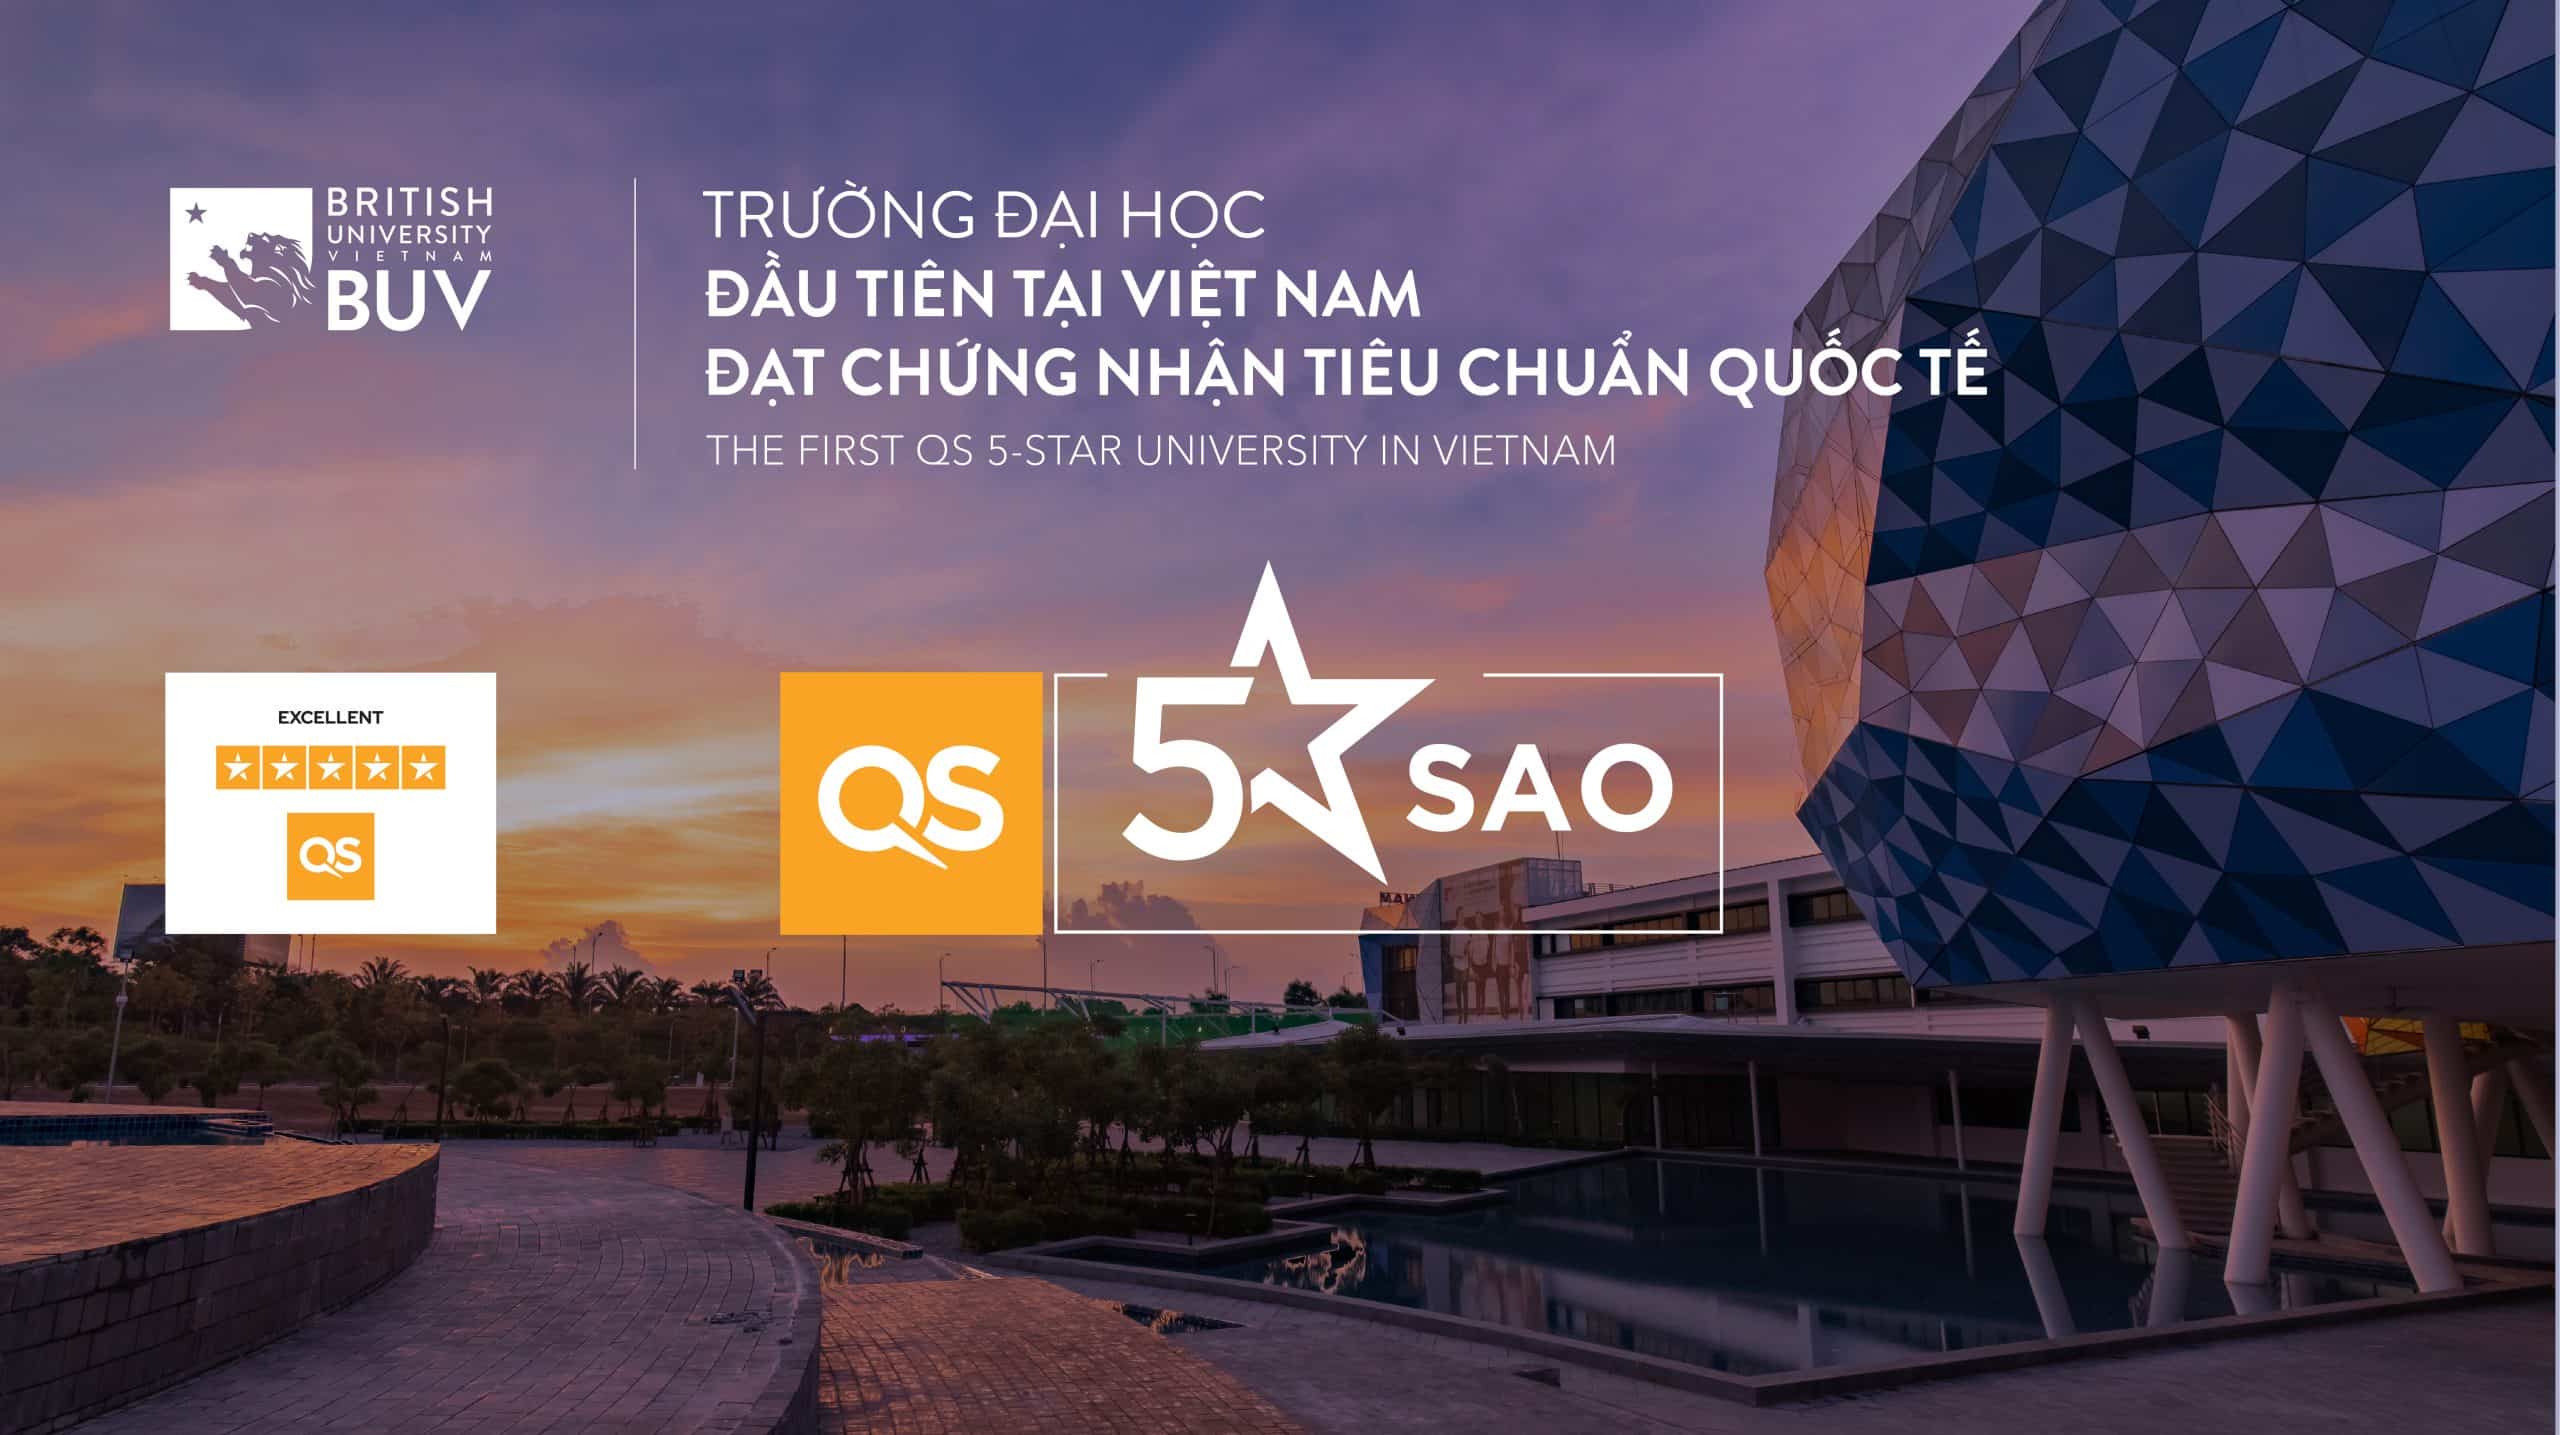 British University Vietnam (BUV) has officially become the First University in Vietnam to be awarded a 5 Star overall rating from QS (Quacquarelli Symonds) 